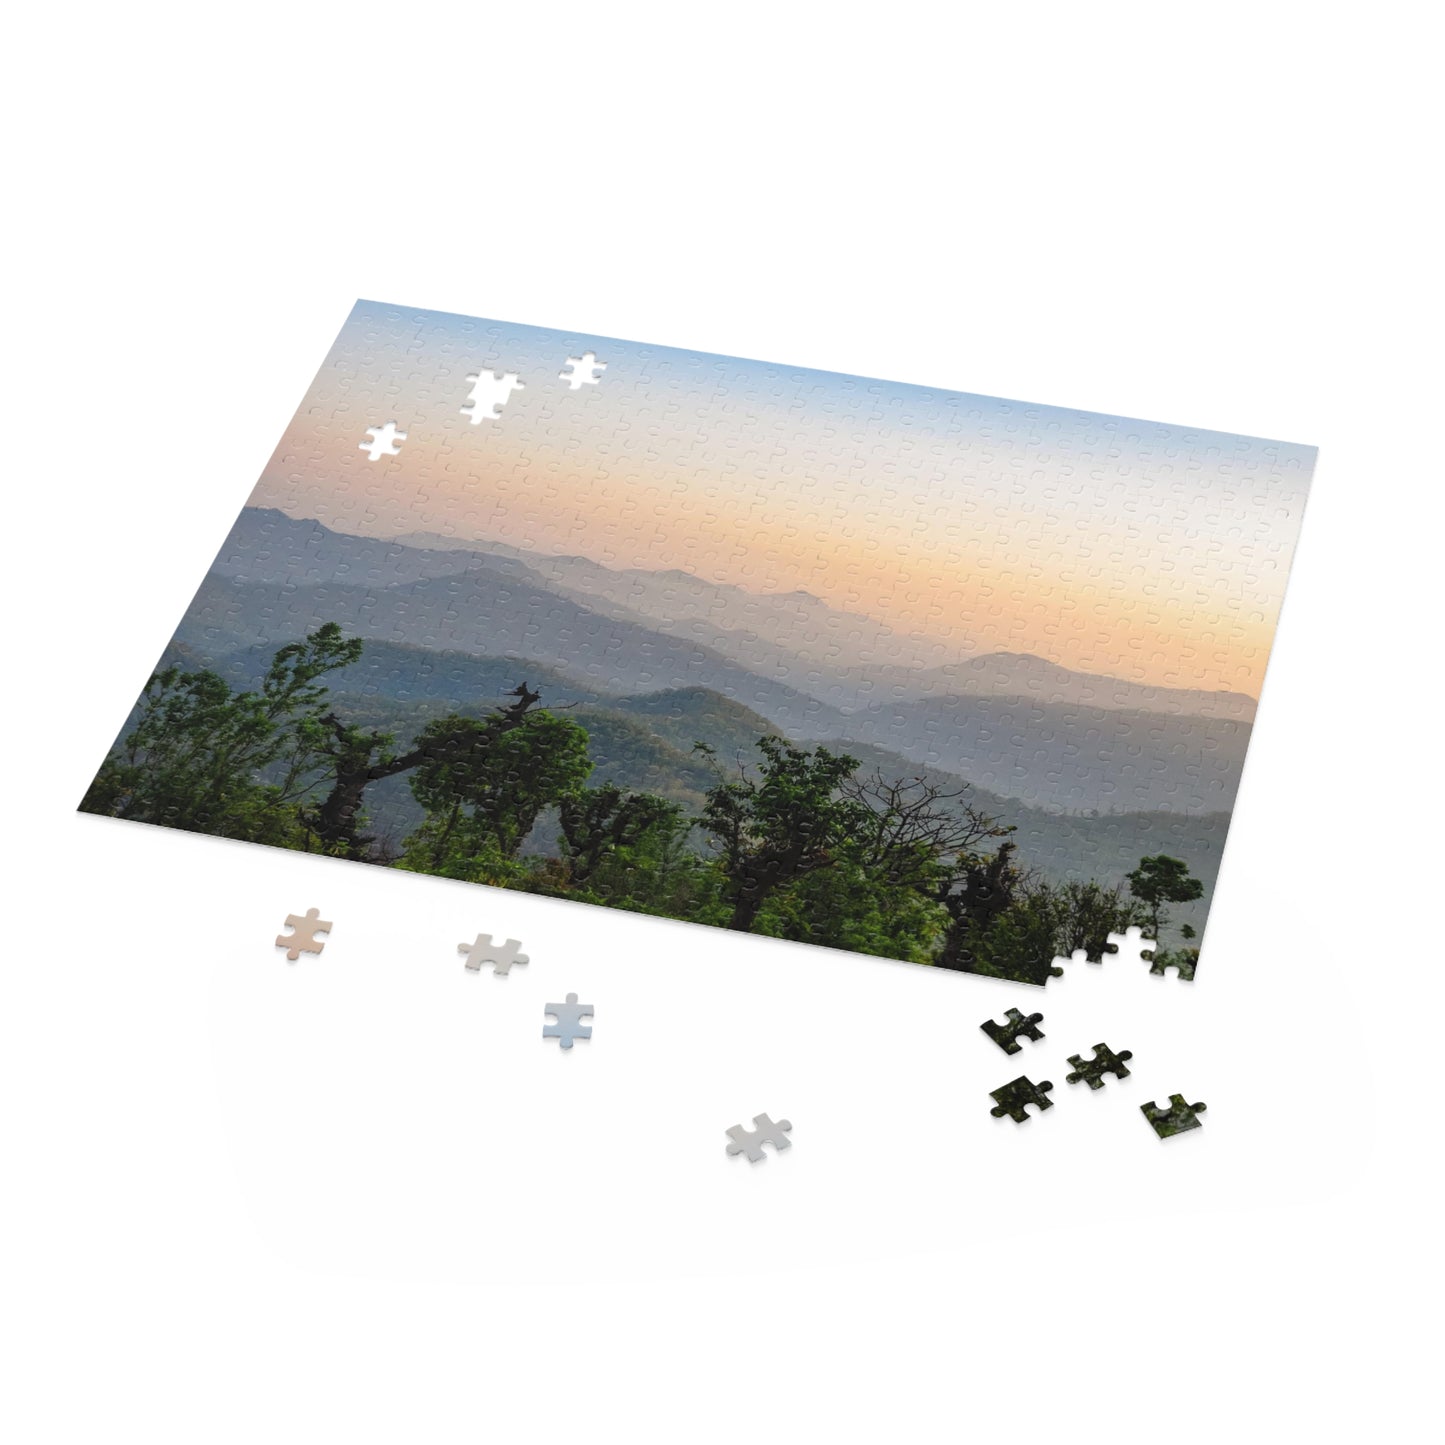 500 Piece Puzzle - Sunset in the Himalayas, Nepal - Leah Ramuglia Photography